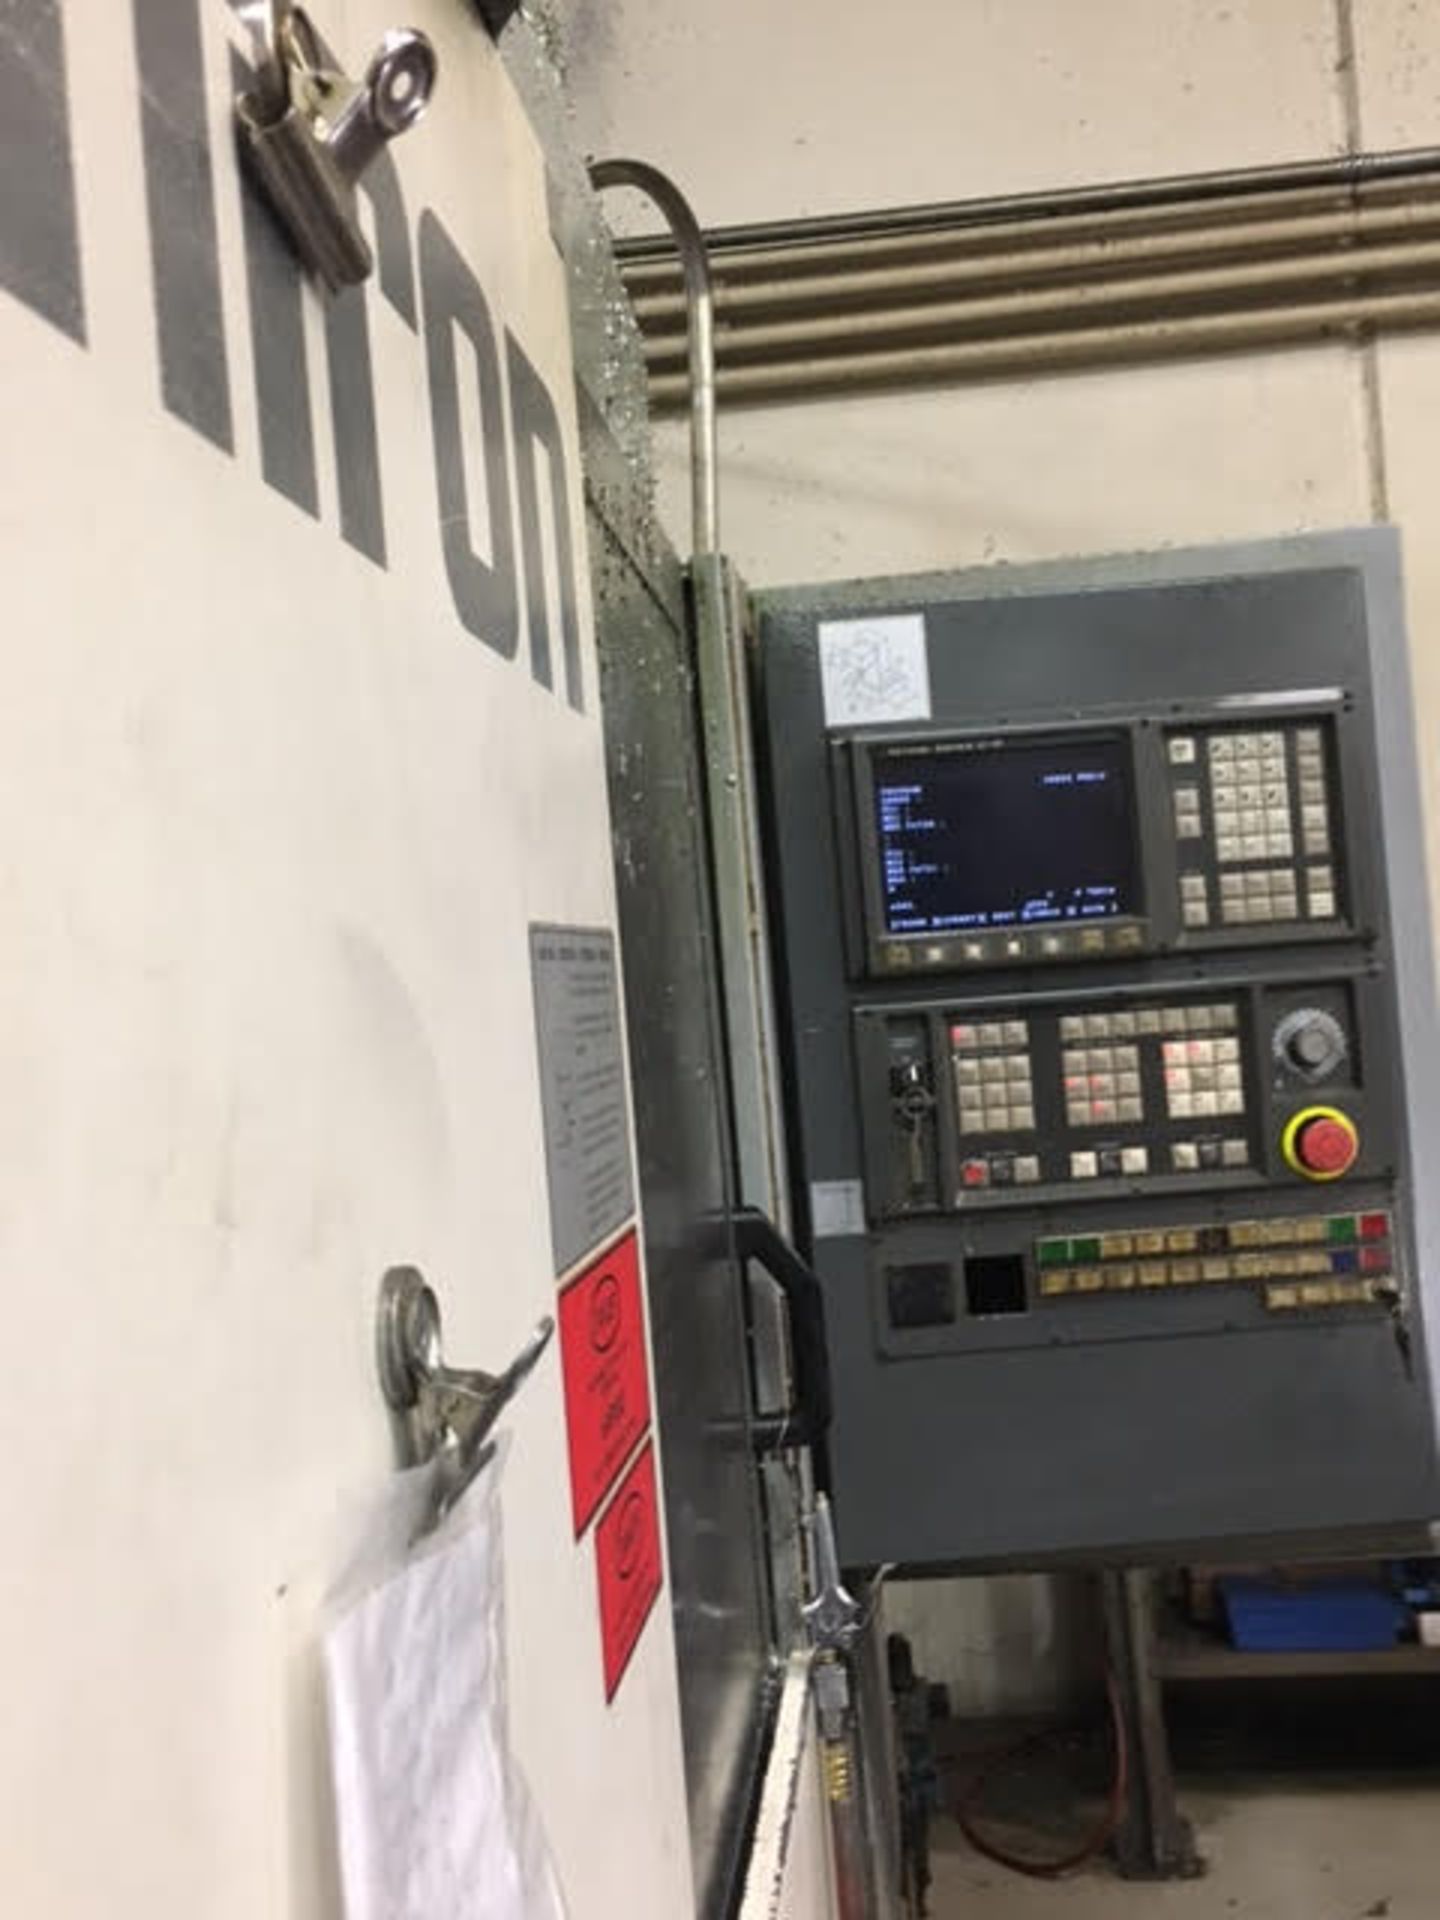 Chiron FZ-12W Magnum CNC Vertical Machining Center, S/N 469-79, New 1998 - Image 3 of 6